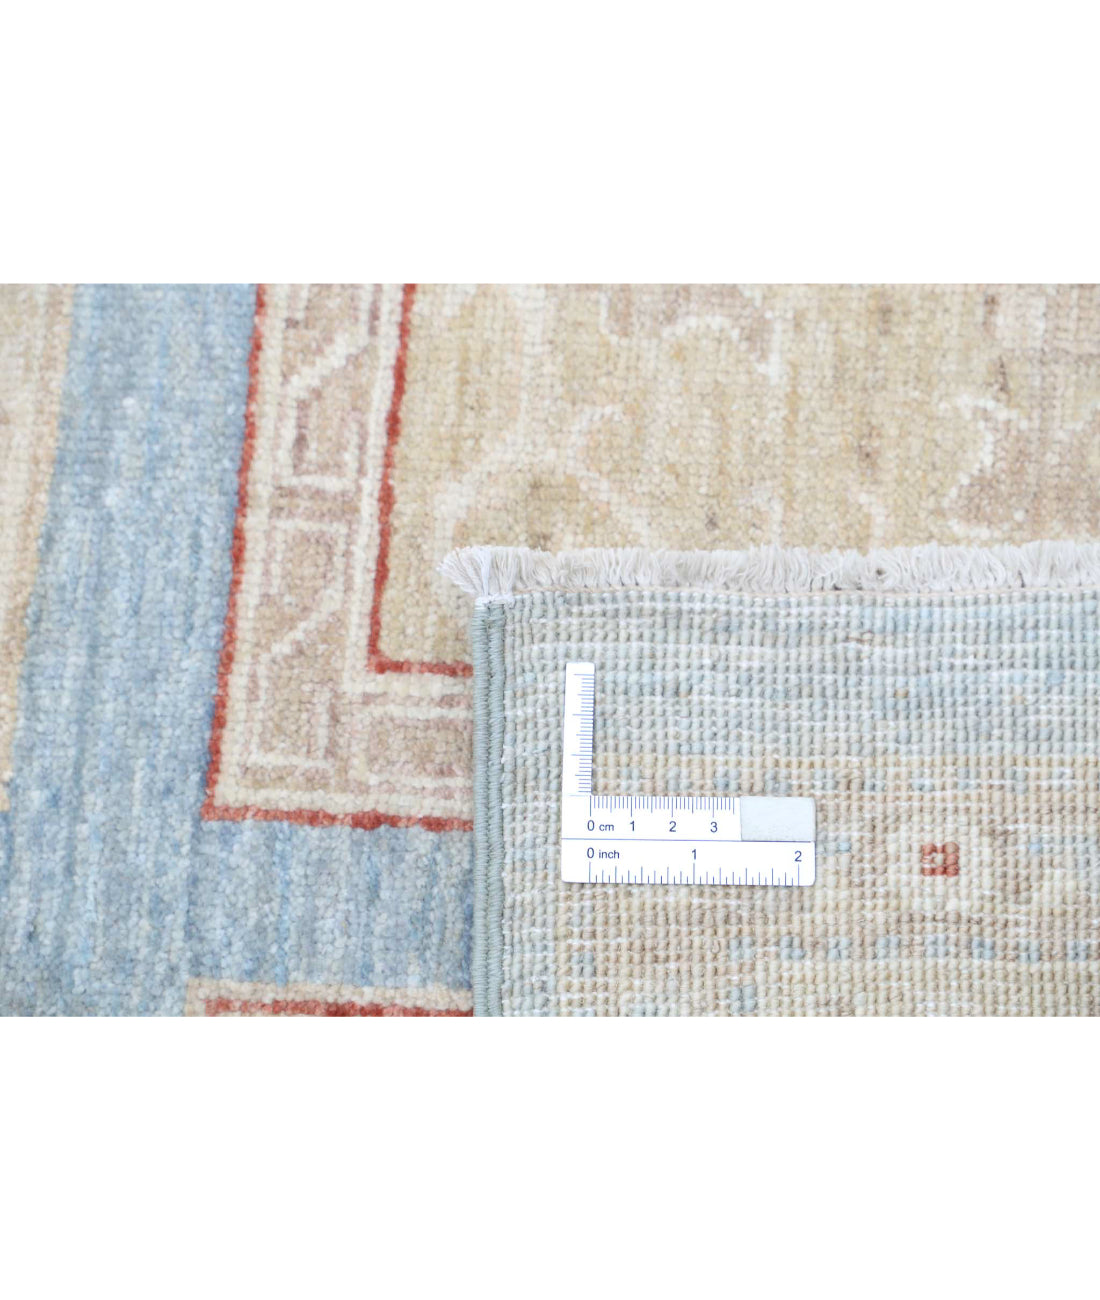 Serenity 8'1'' X 10'11'' Hand-Knotted Wool Rug 8'1'' x 10'11'' (243 X 328) / Blue / Ivory